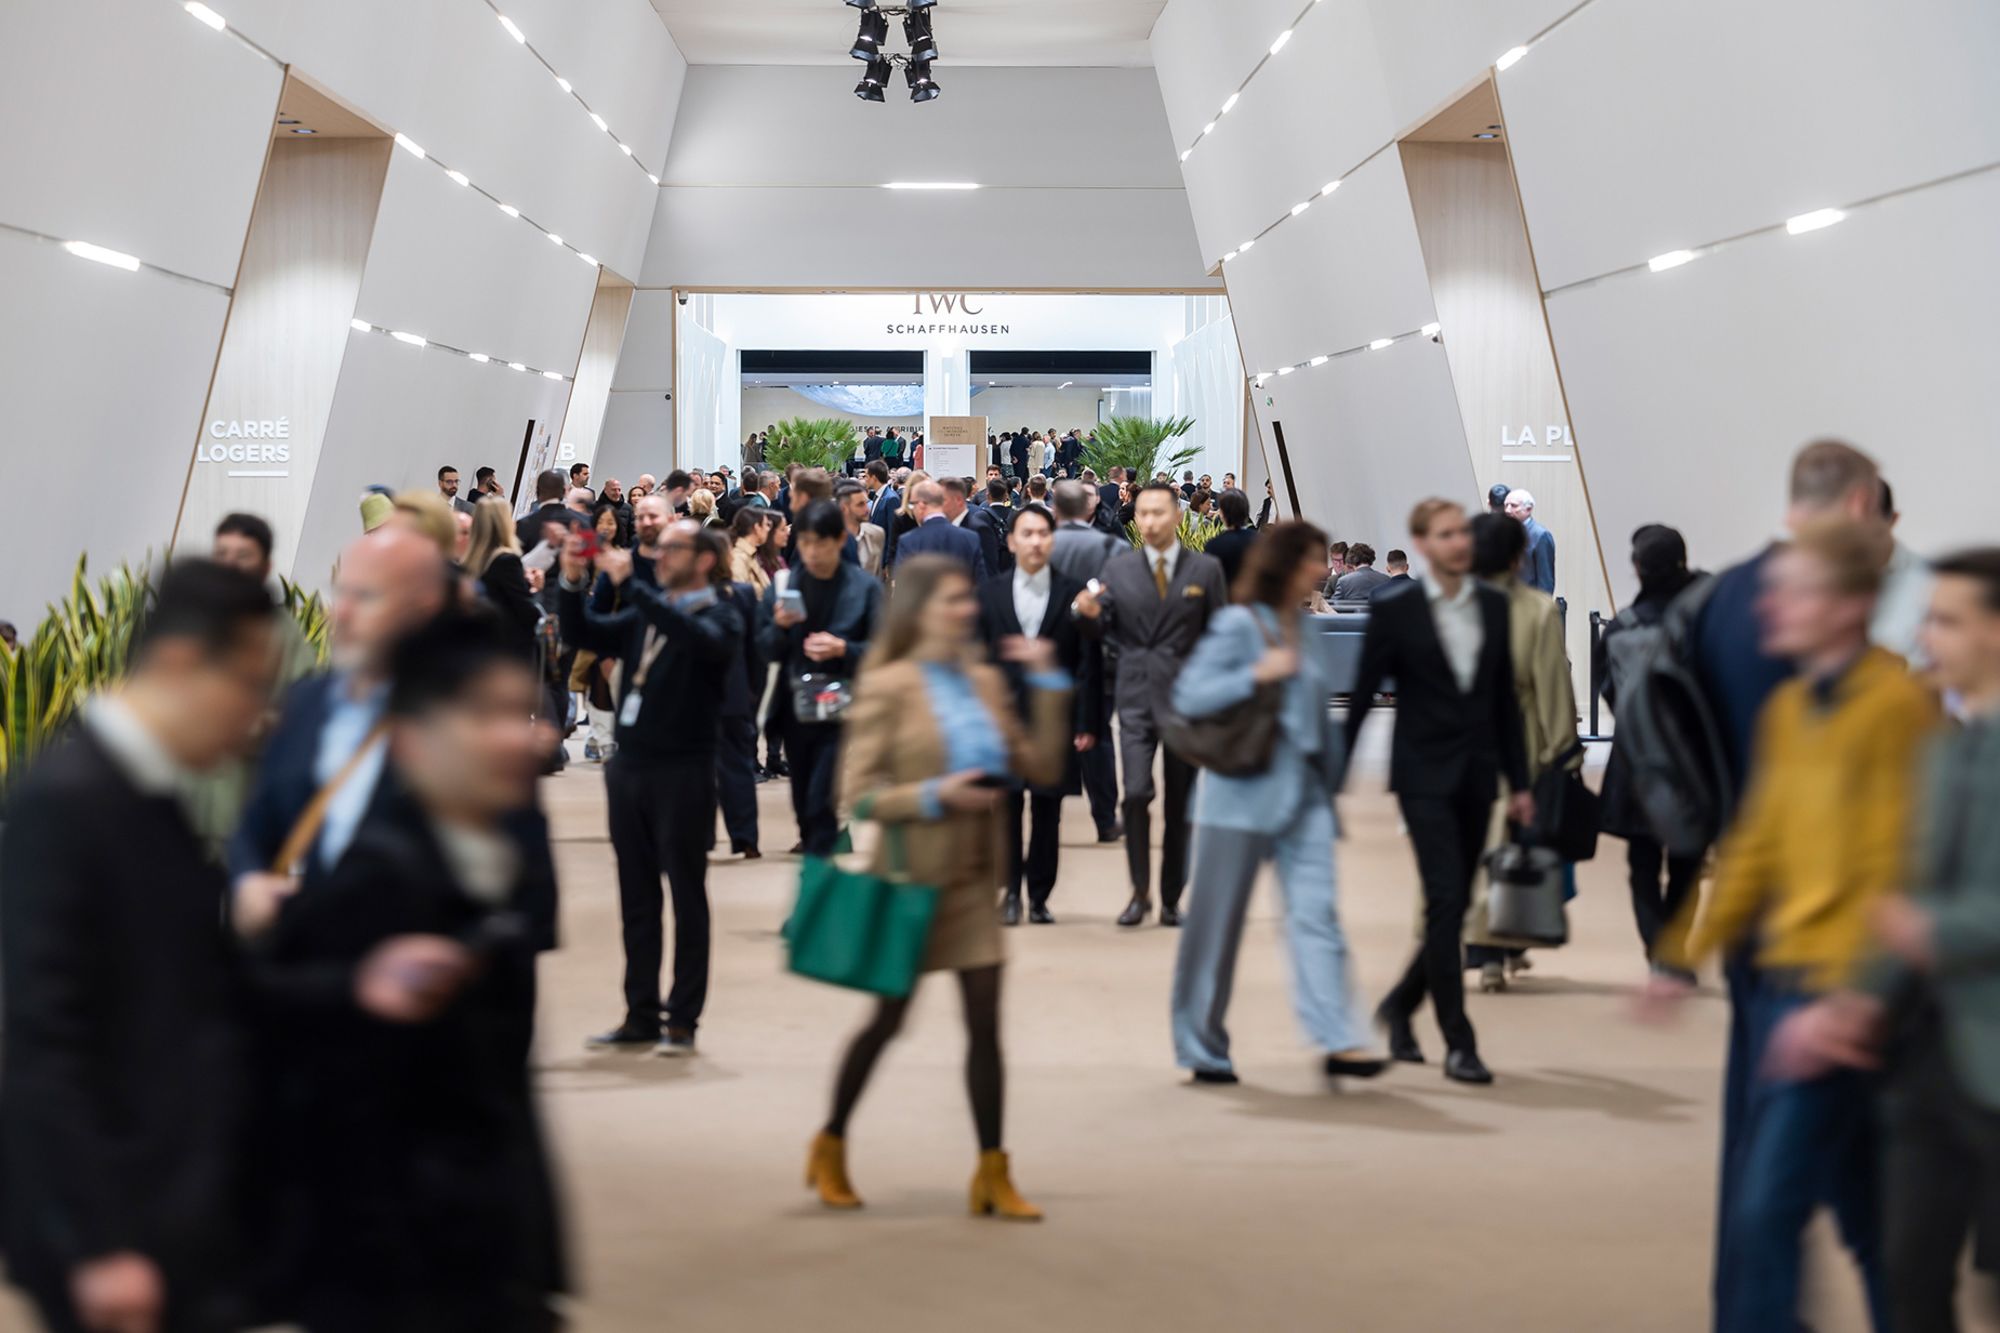 According to event CEO Matthieu Humair, 40% of Watches and Wonders' 49,000 attendees travelled from Asia, with a significant portion coming from China.